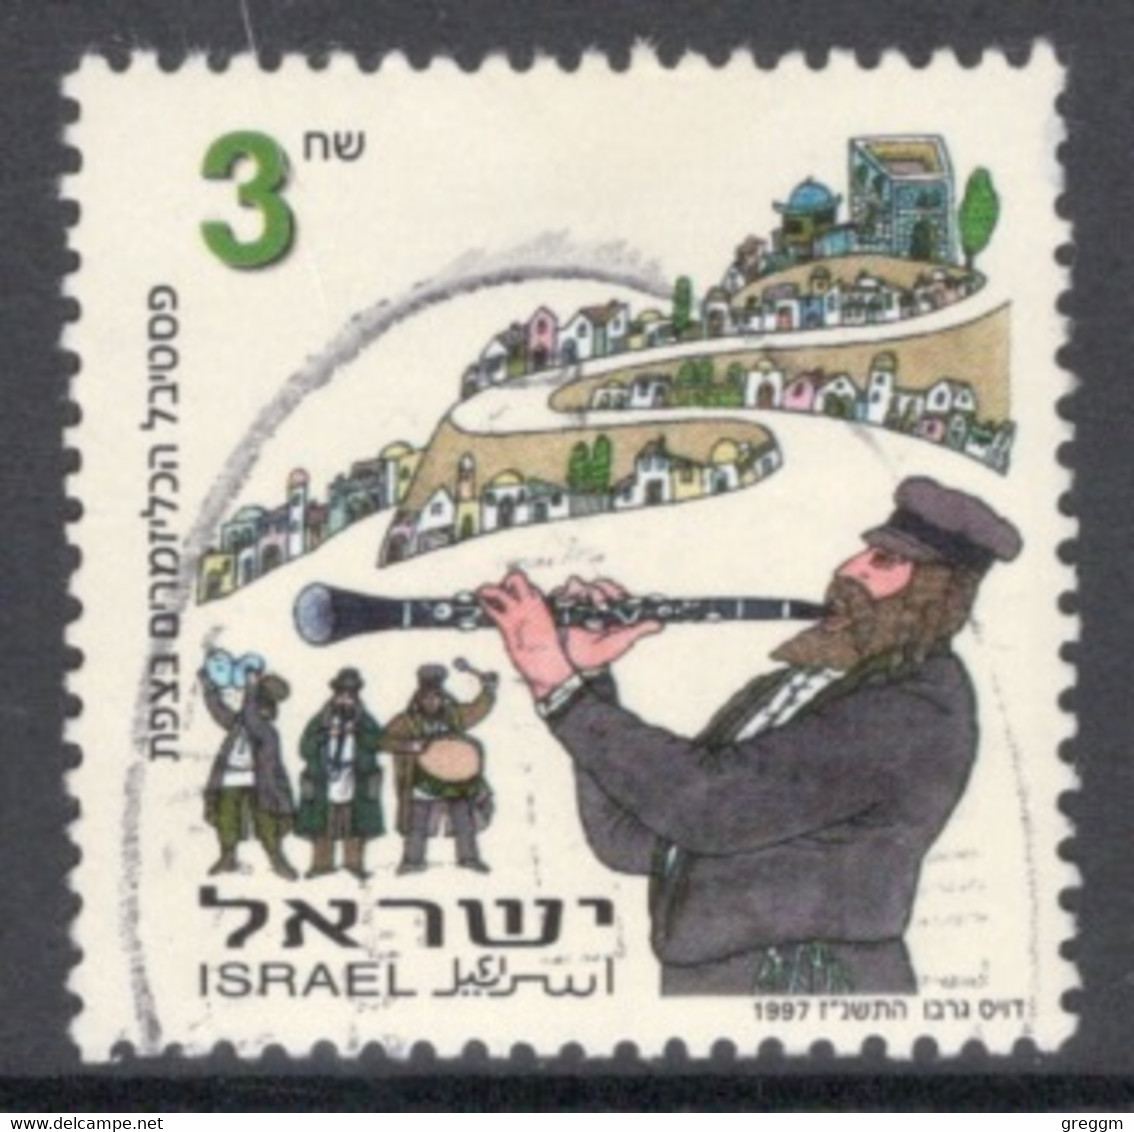 Israel 1997 Single Stamp Celebrating Music And Dance Festivals In Fine Used - Gebraucht (ohne Tabs)